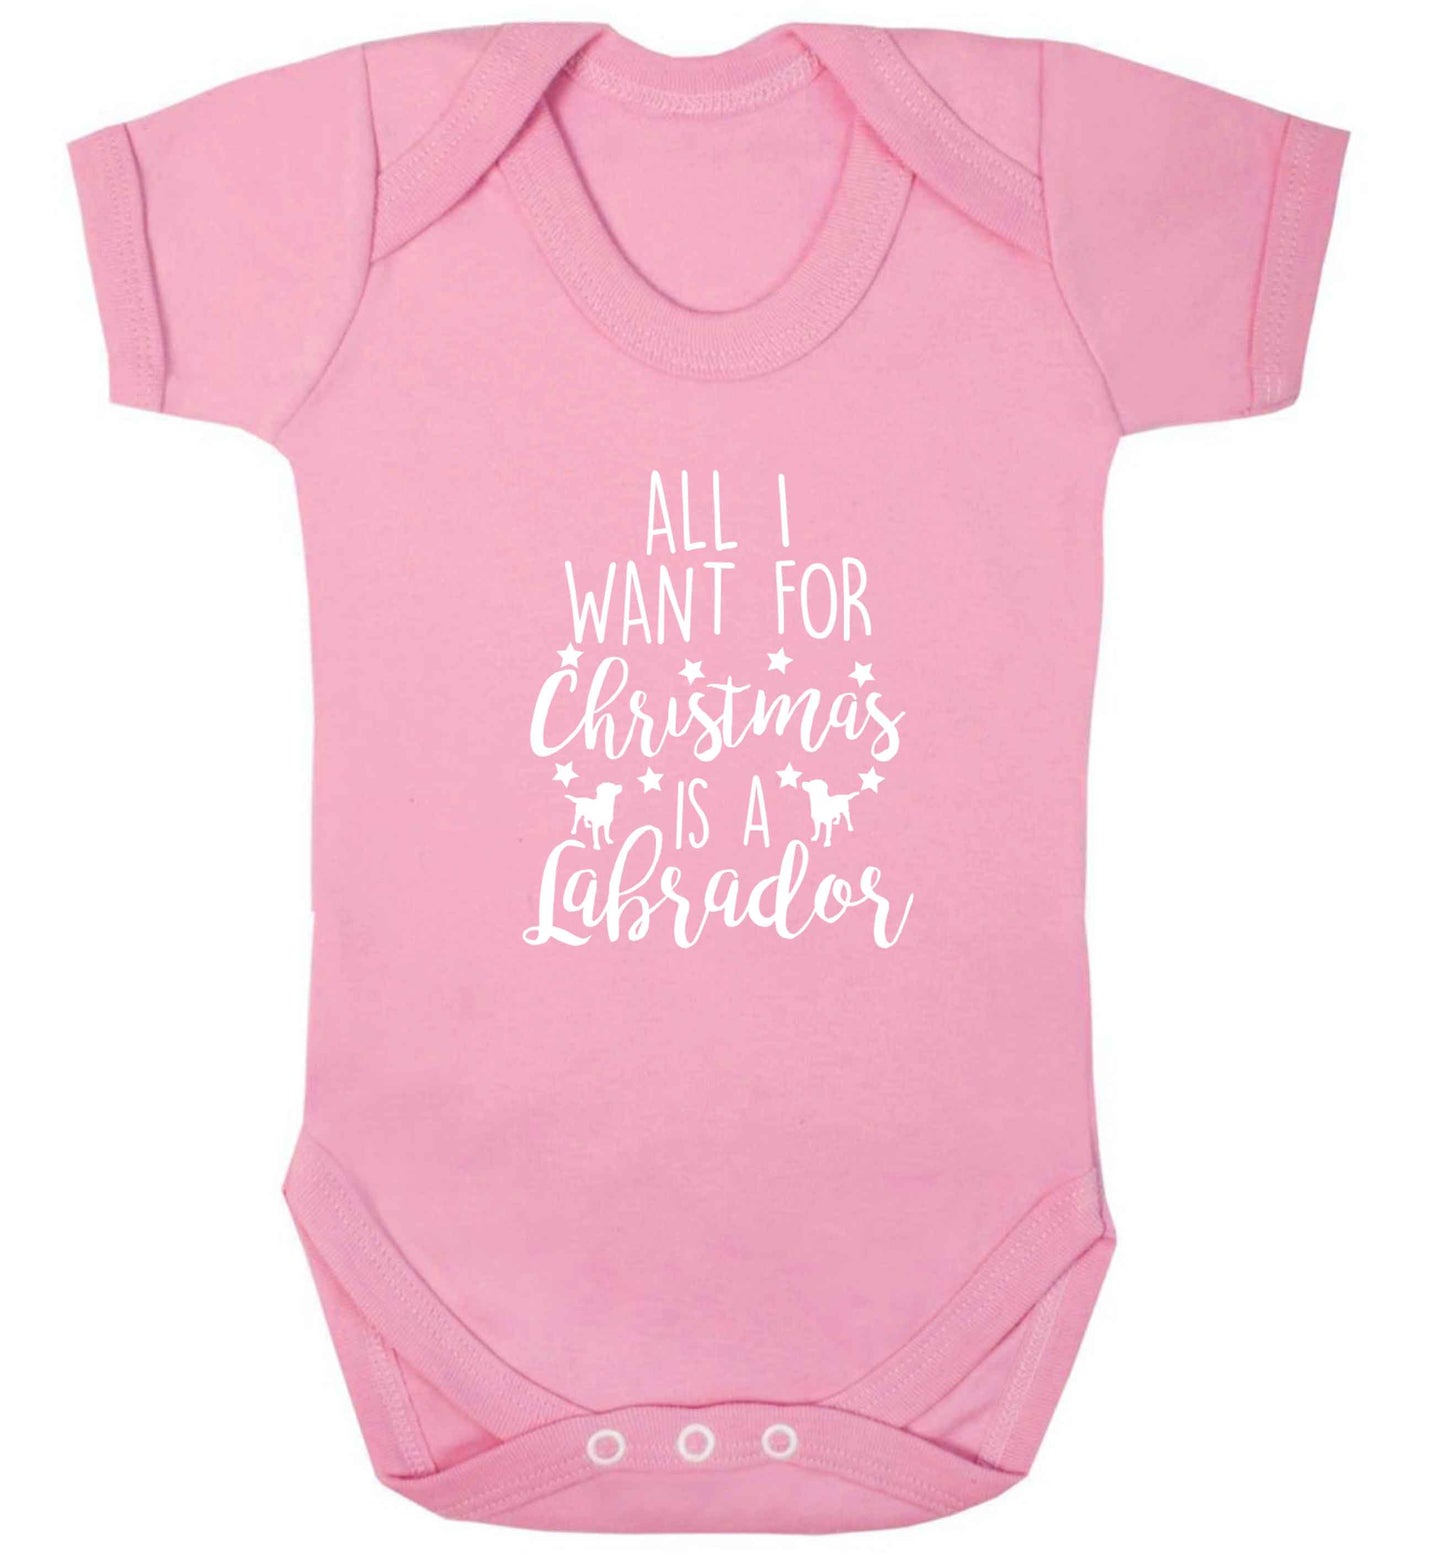 All I want for Christmas is a labrador baby vest pale pink 18-24 months